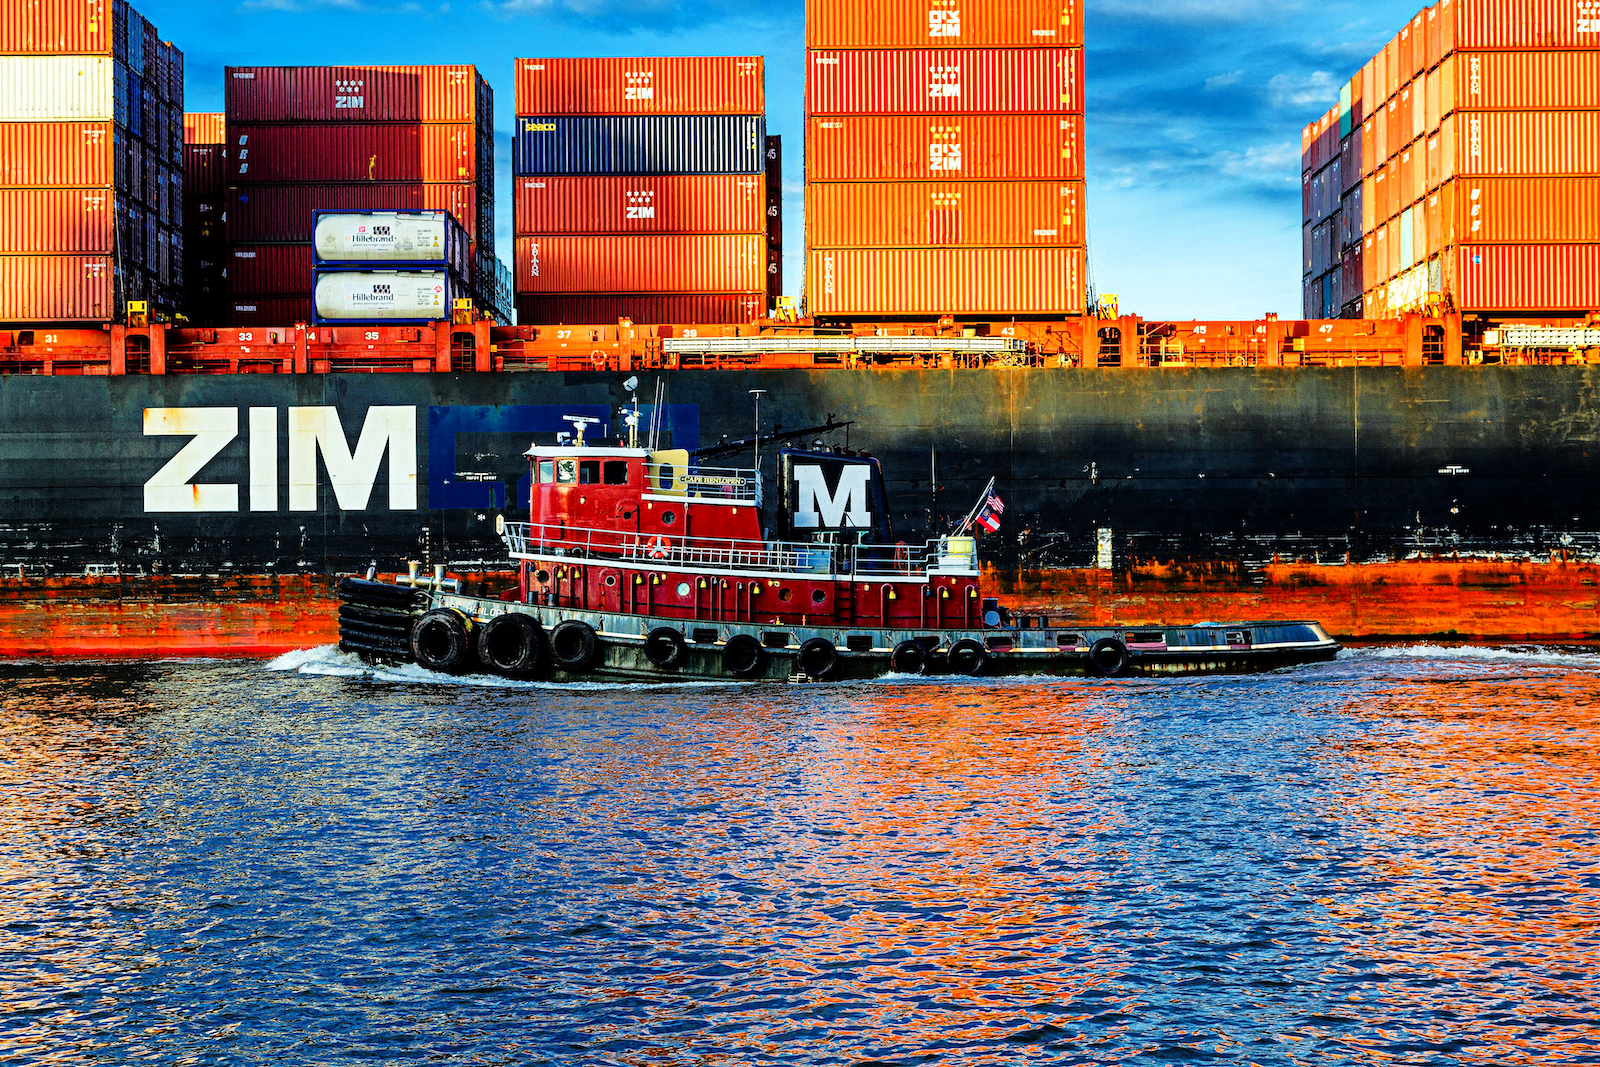 ZIM owned container ship